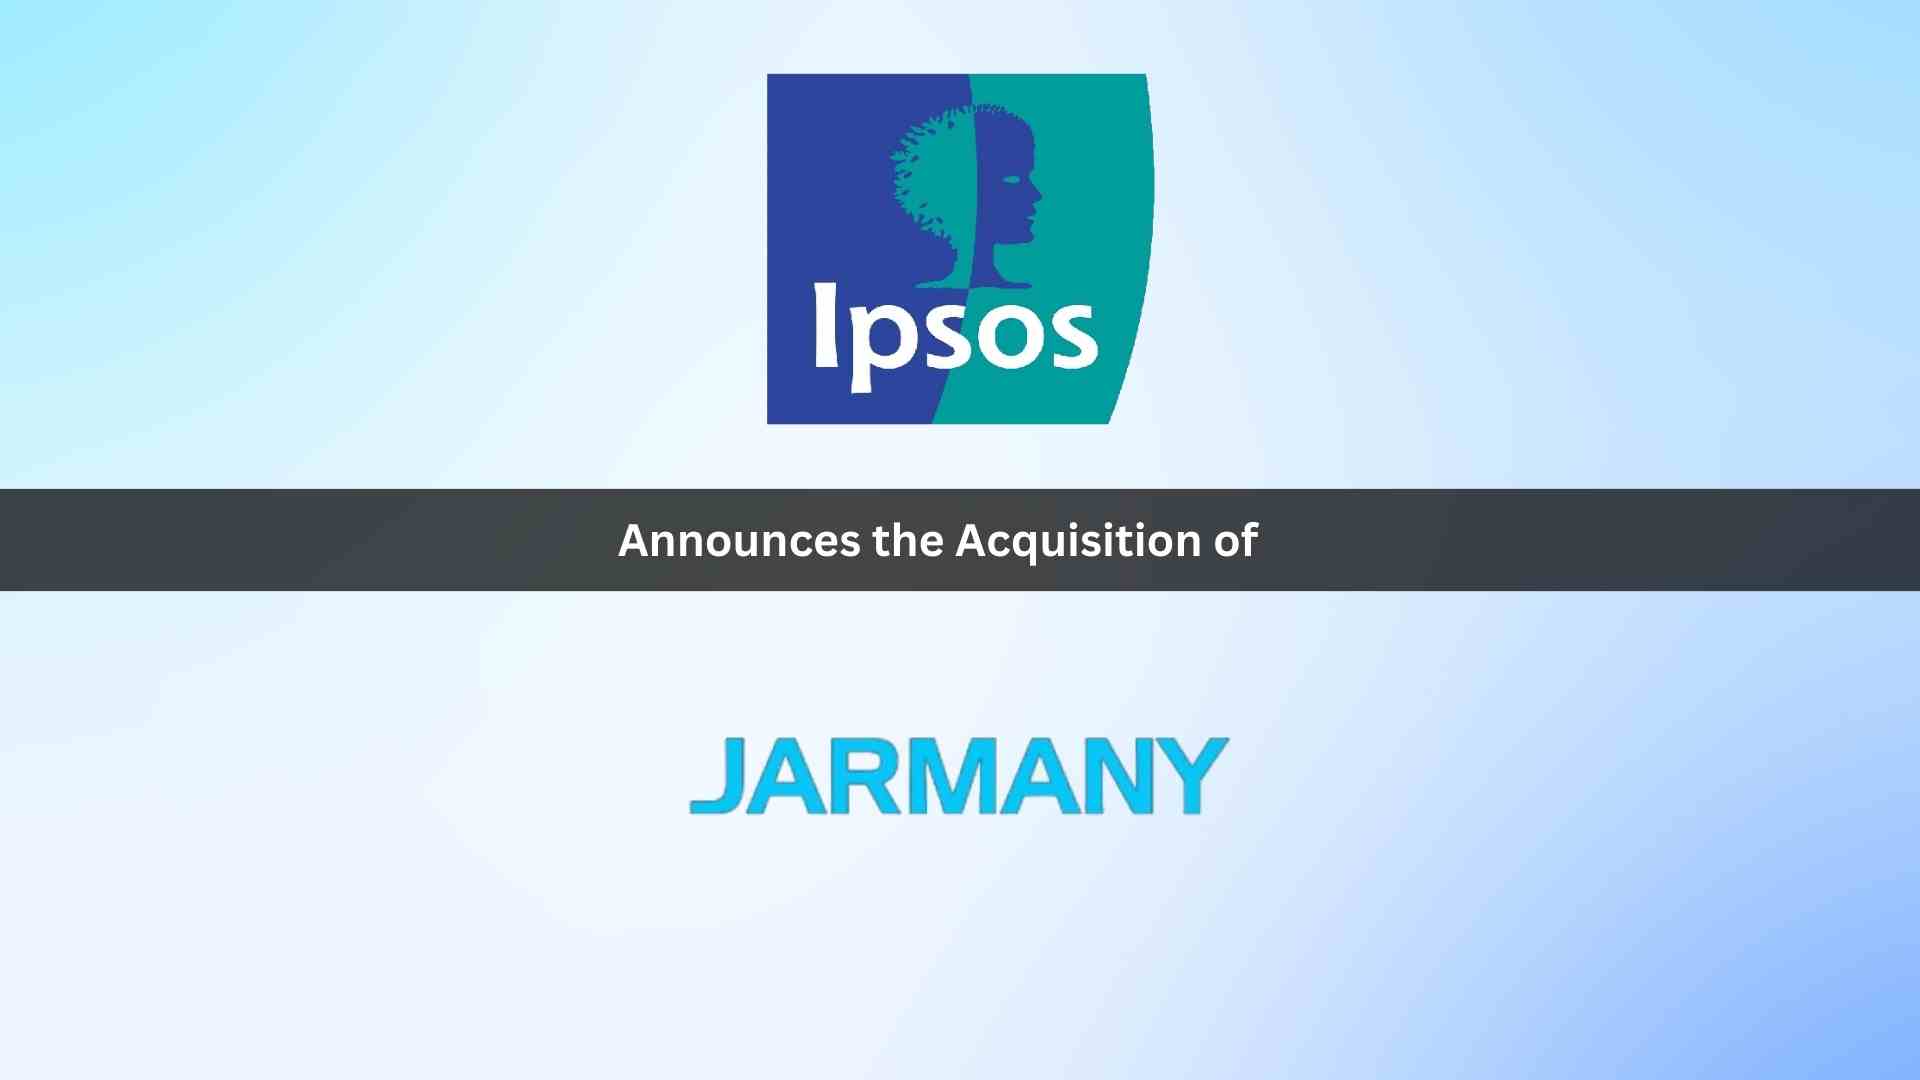 Ipsos acquires Jarmany, a company specialising in data management and analytics in the UK